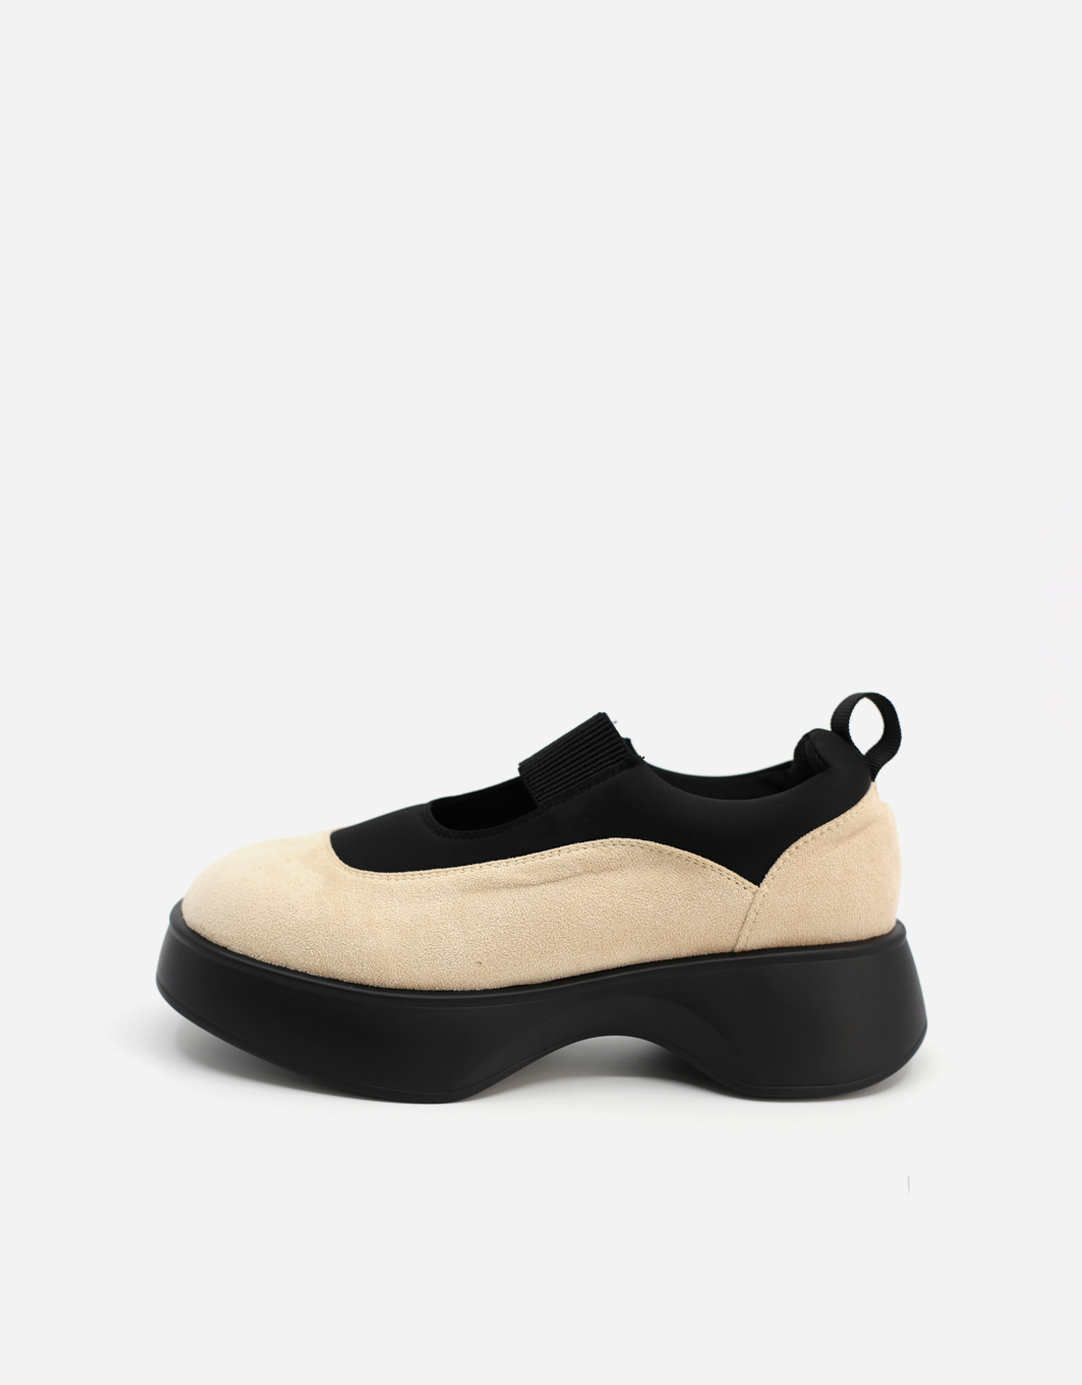 IVORY PLATFORM BAND SNEAKERS